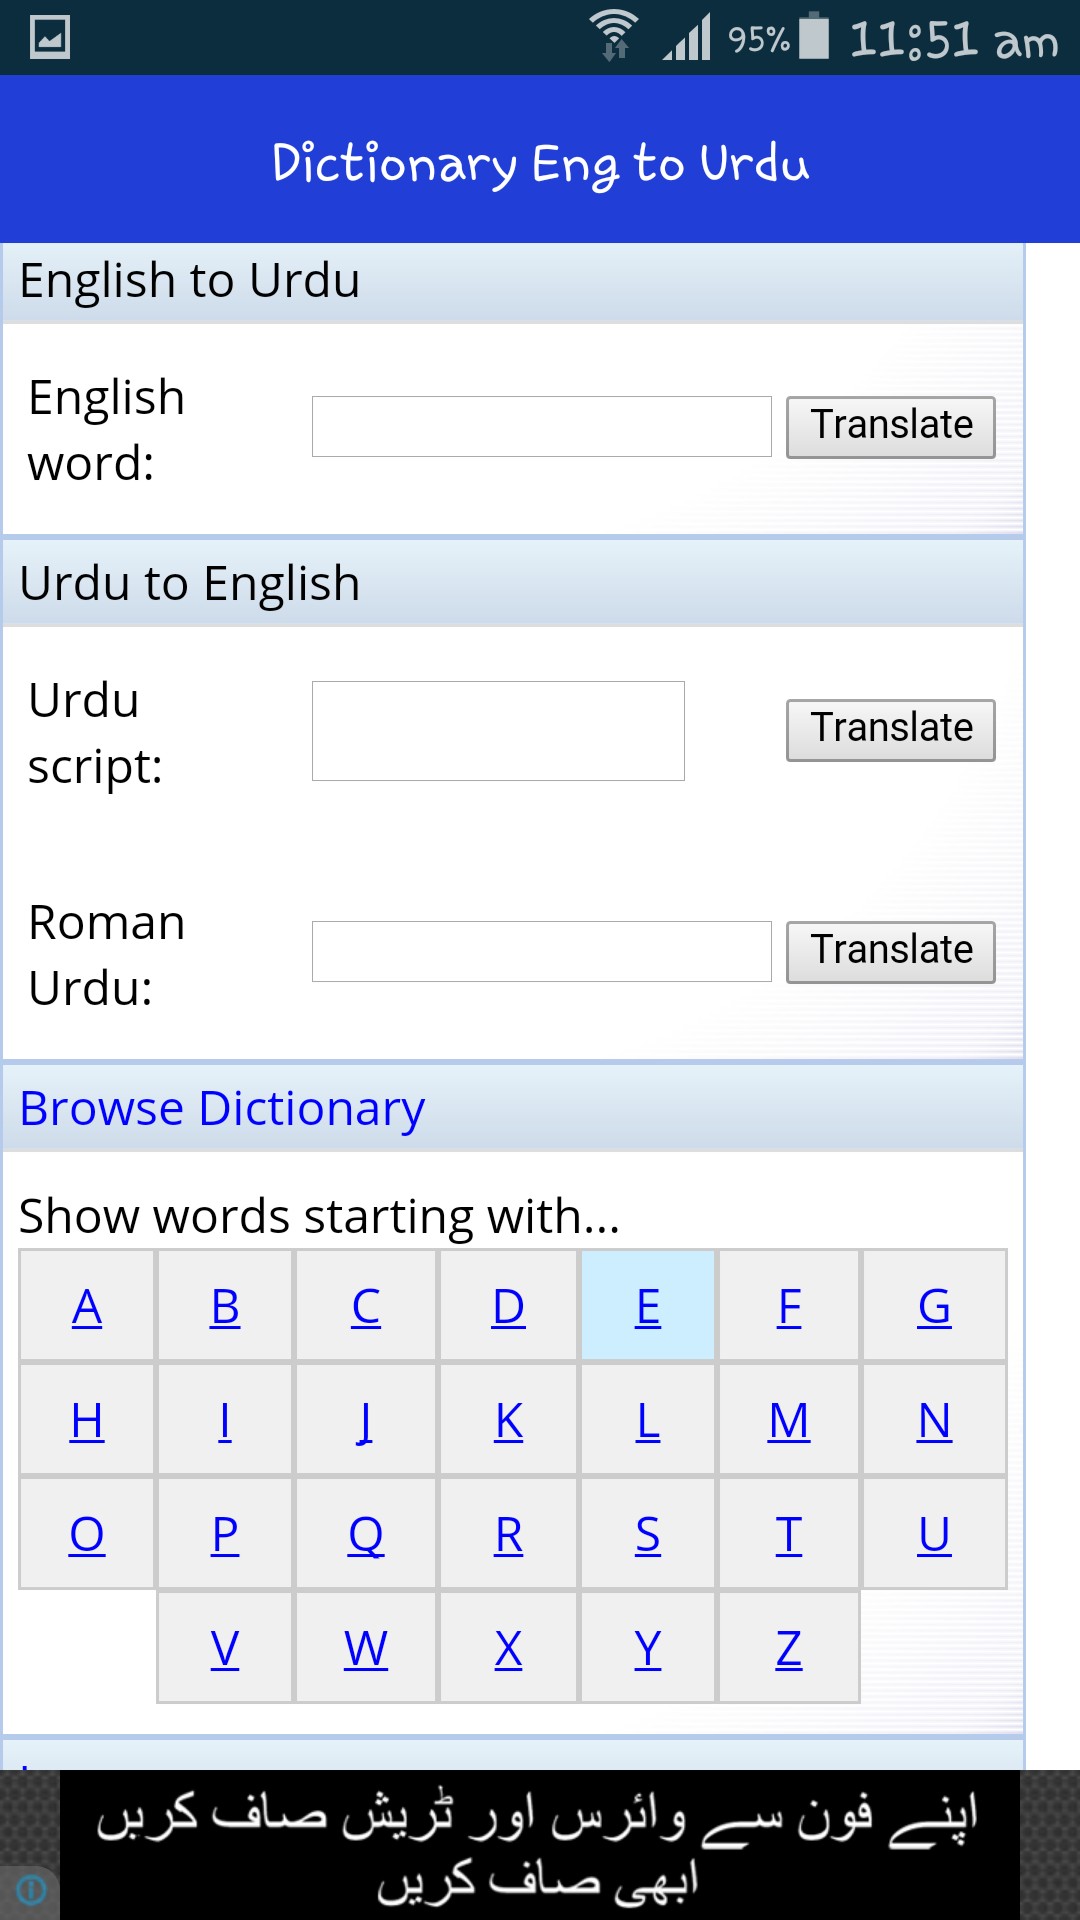 english to urdu dictionary download